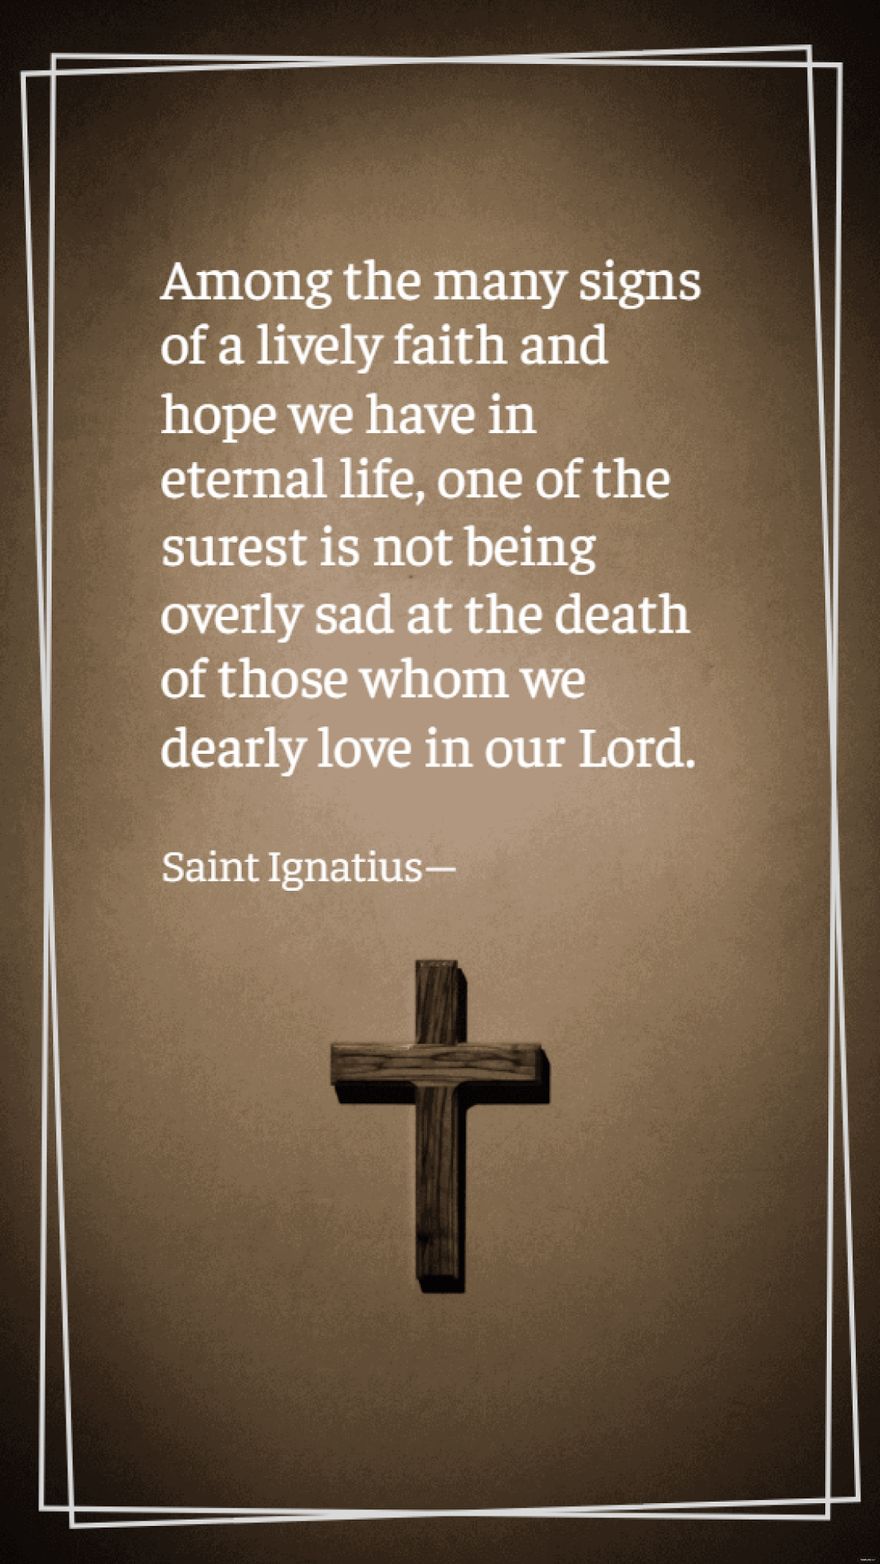 Saint Ignatius - Among the many signs of a lively faith and hope we have in eternal life, one of the surest is not being overly sad at the death of those whom we dearly love in our Lord.